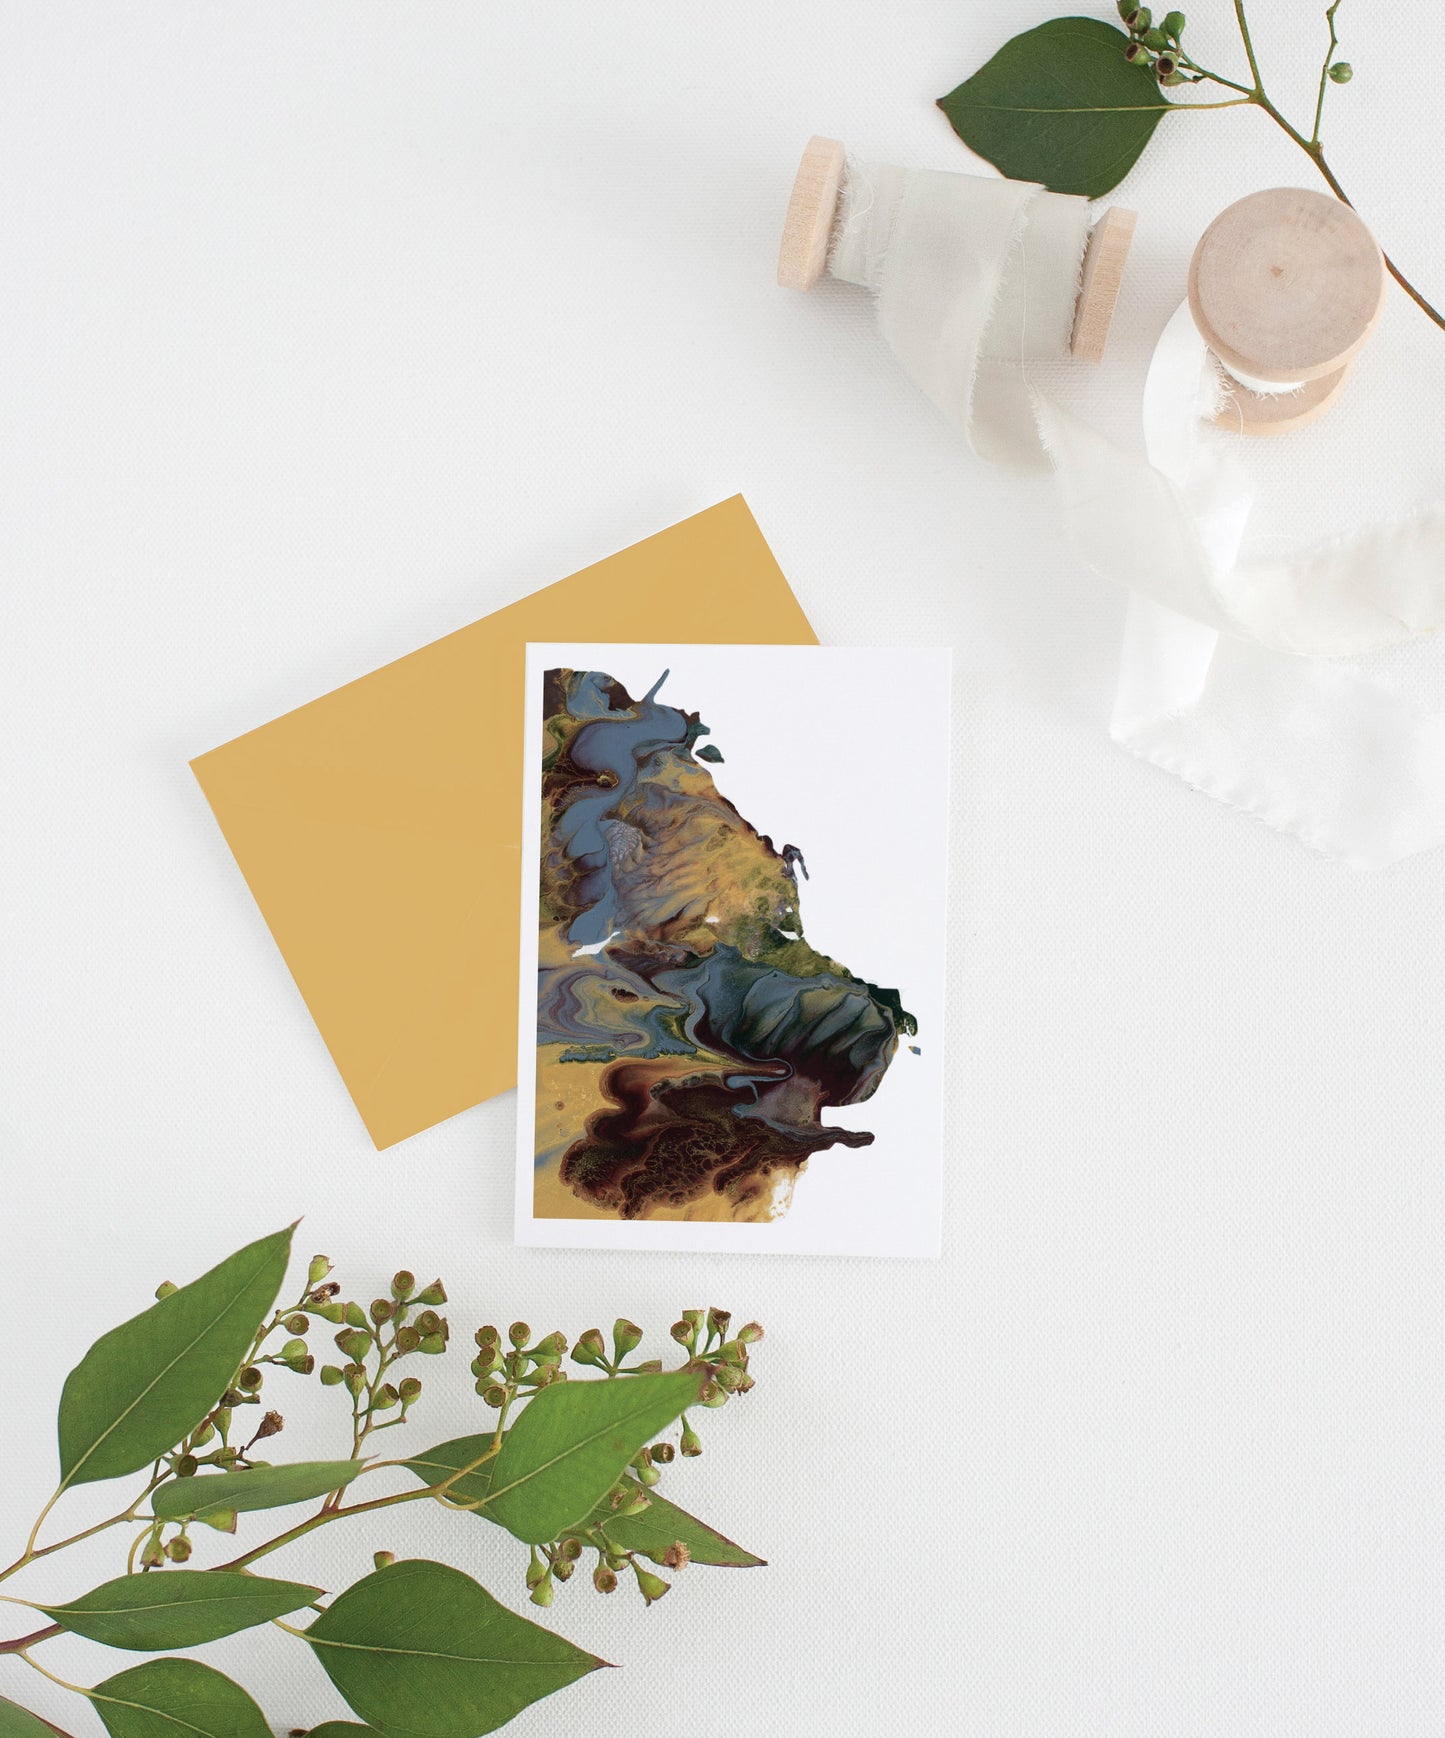 An abstract painting greeting card sits with a gold envelope on a white background.  There are leaves and two small spools of white fabric ribbon near it.